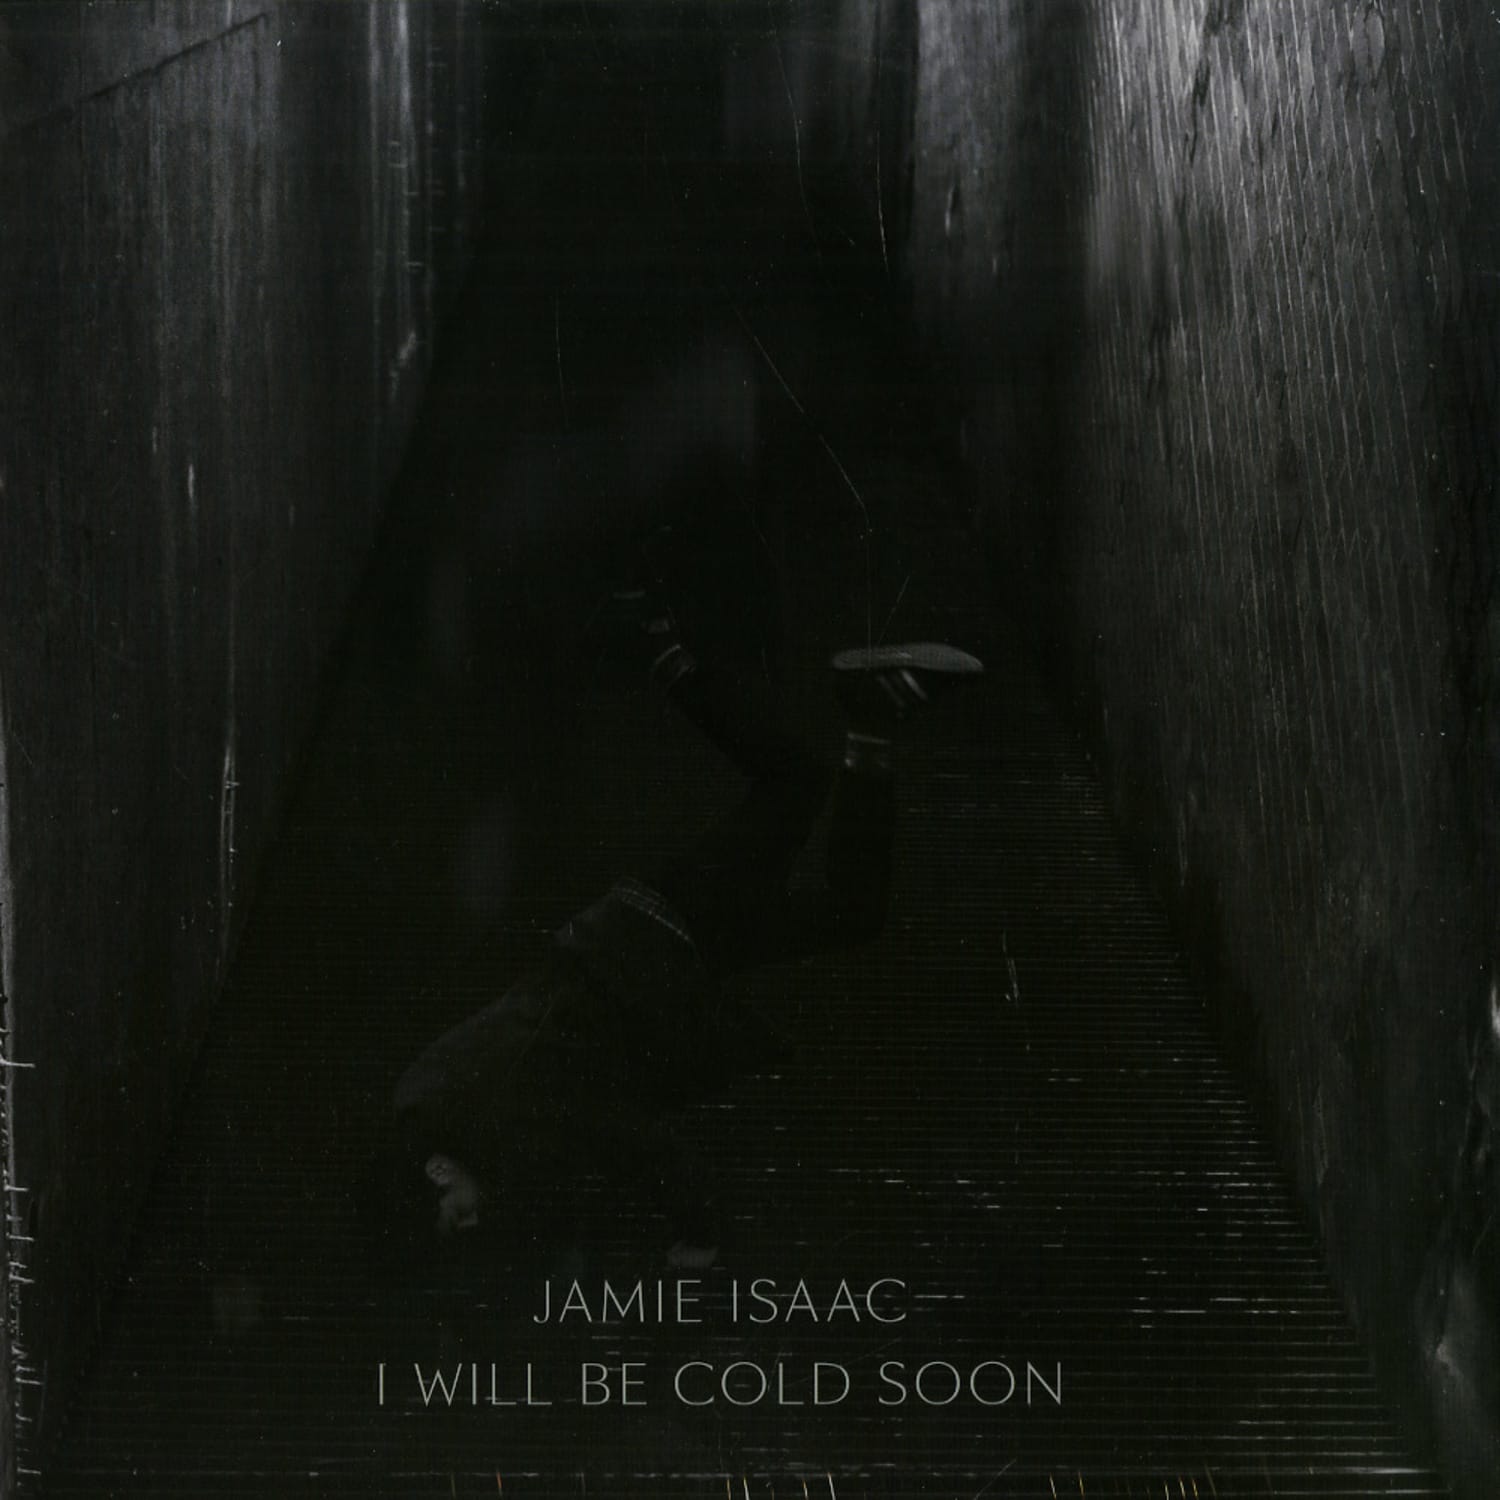 Jamie Isaac - I WILL BE COLD SOON